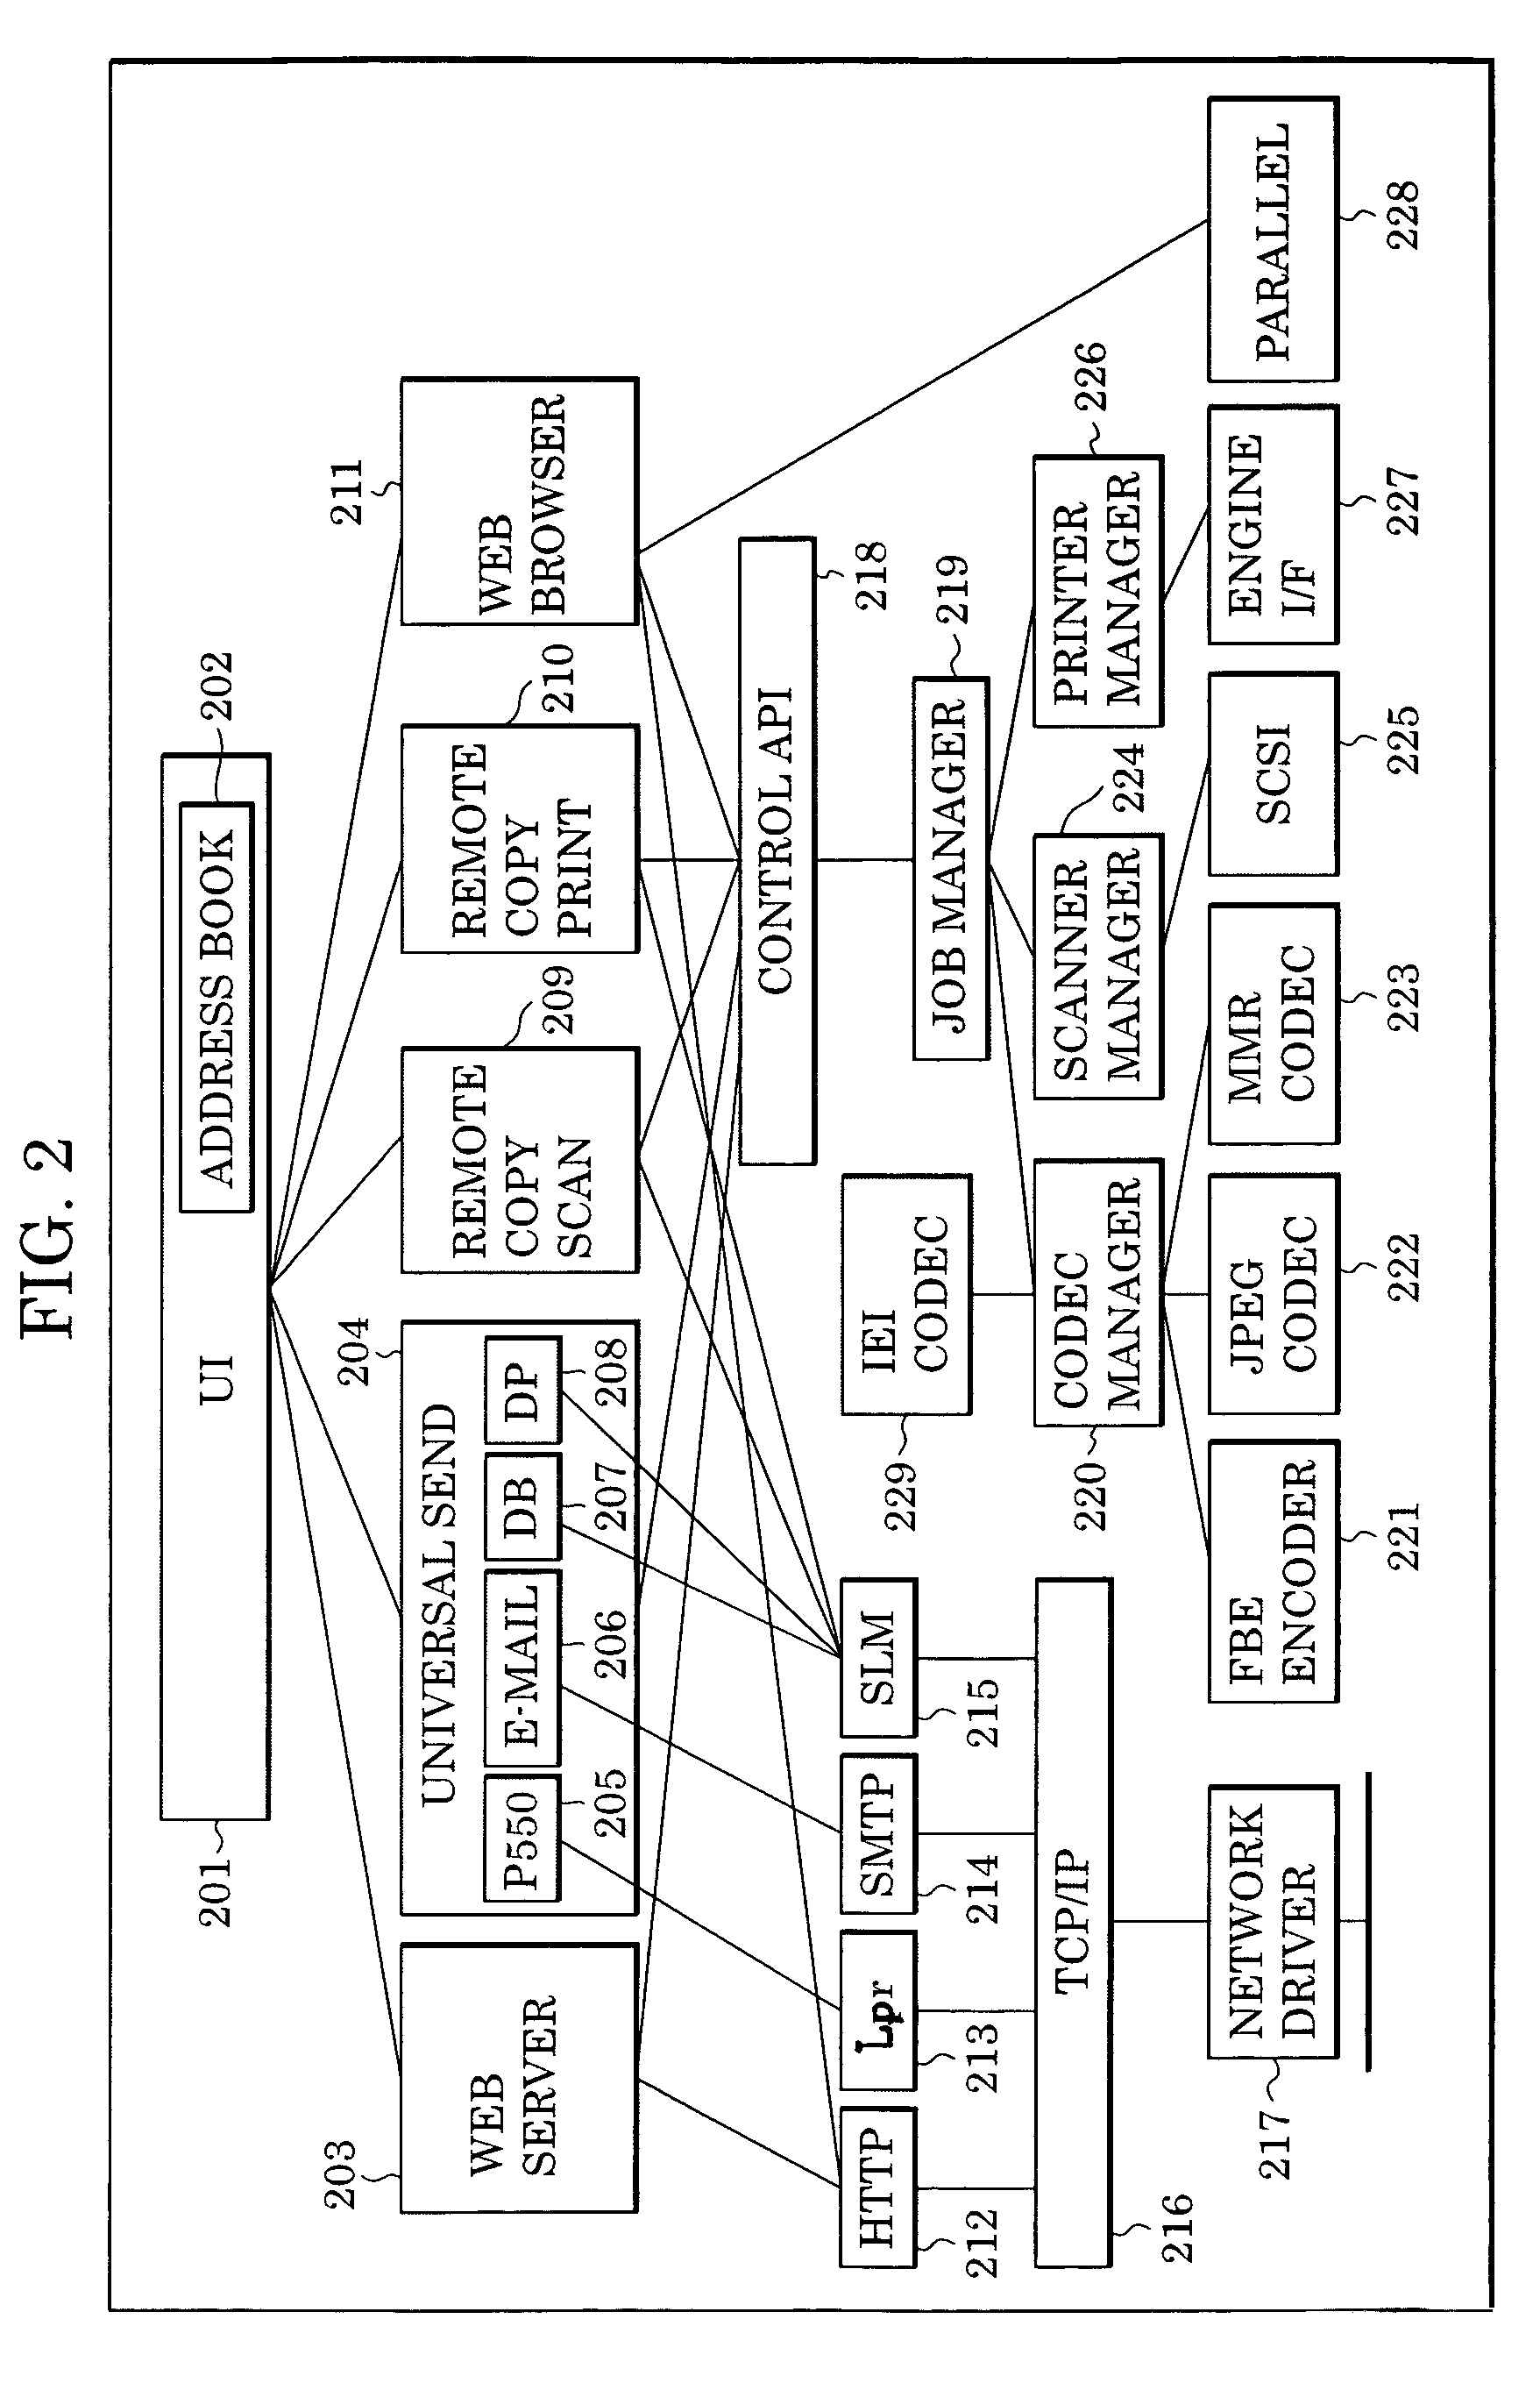 Image processing apparatus, and method for controlling the image processing apparatus to process displayable and non-displayable data received from a server